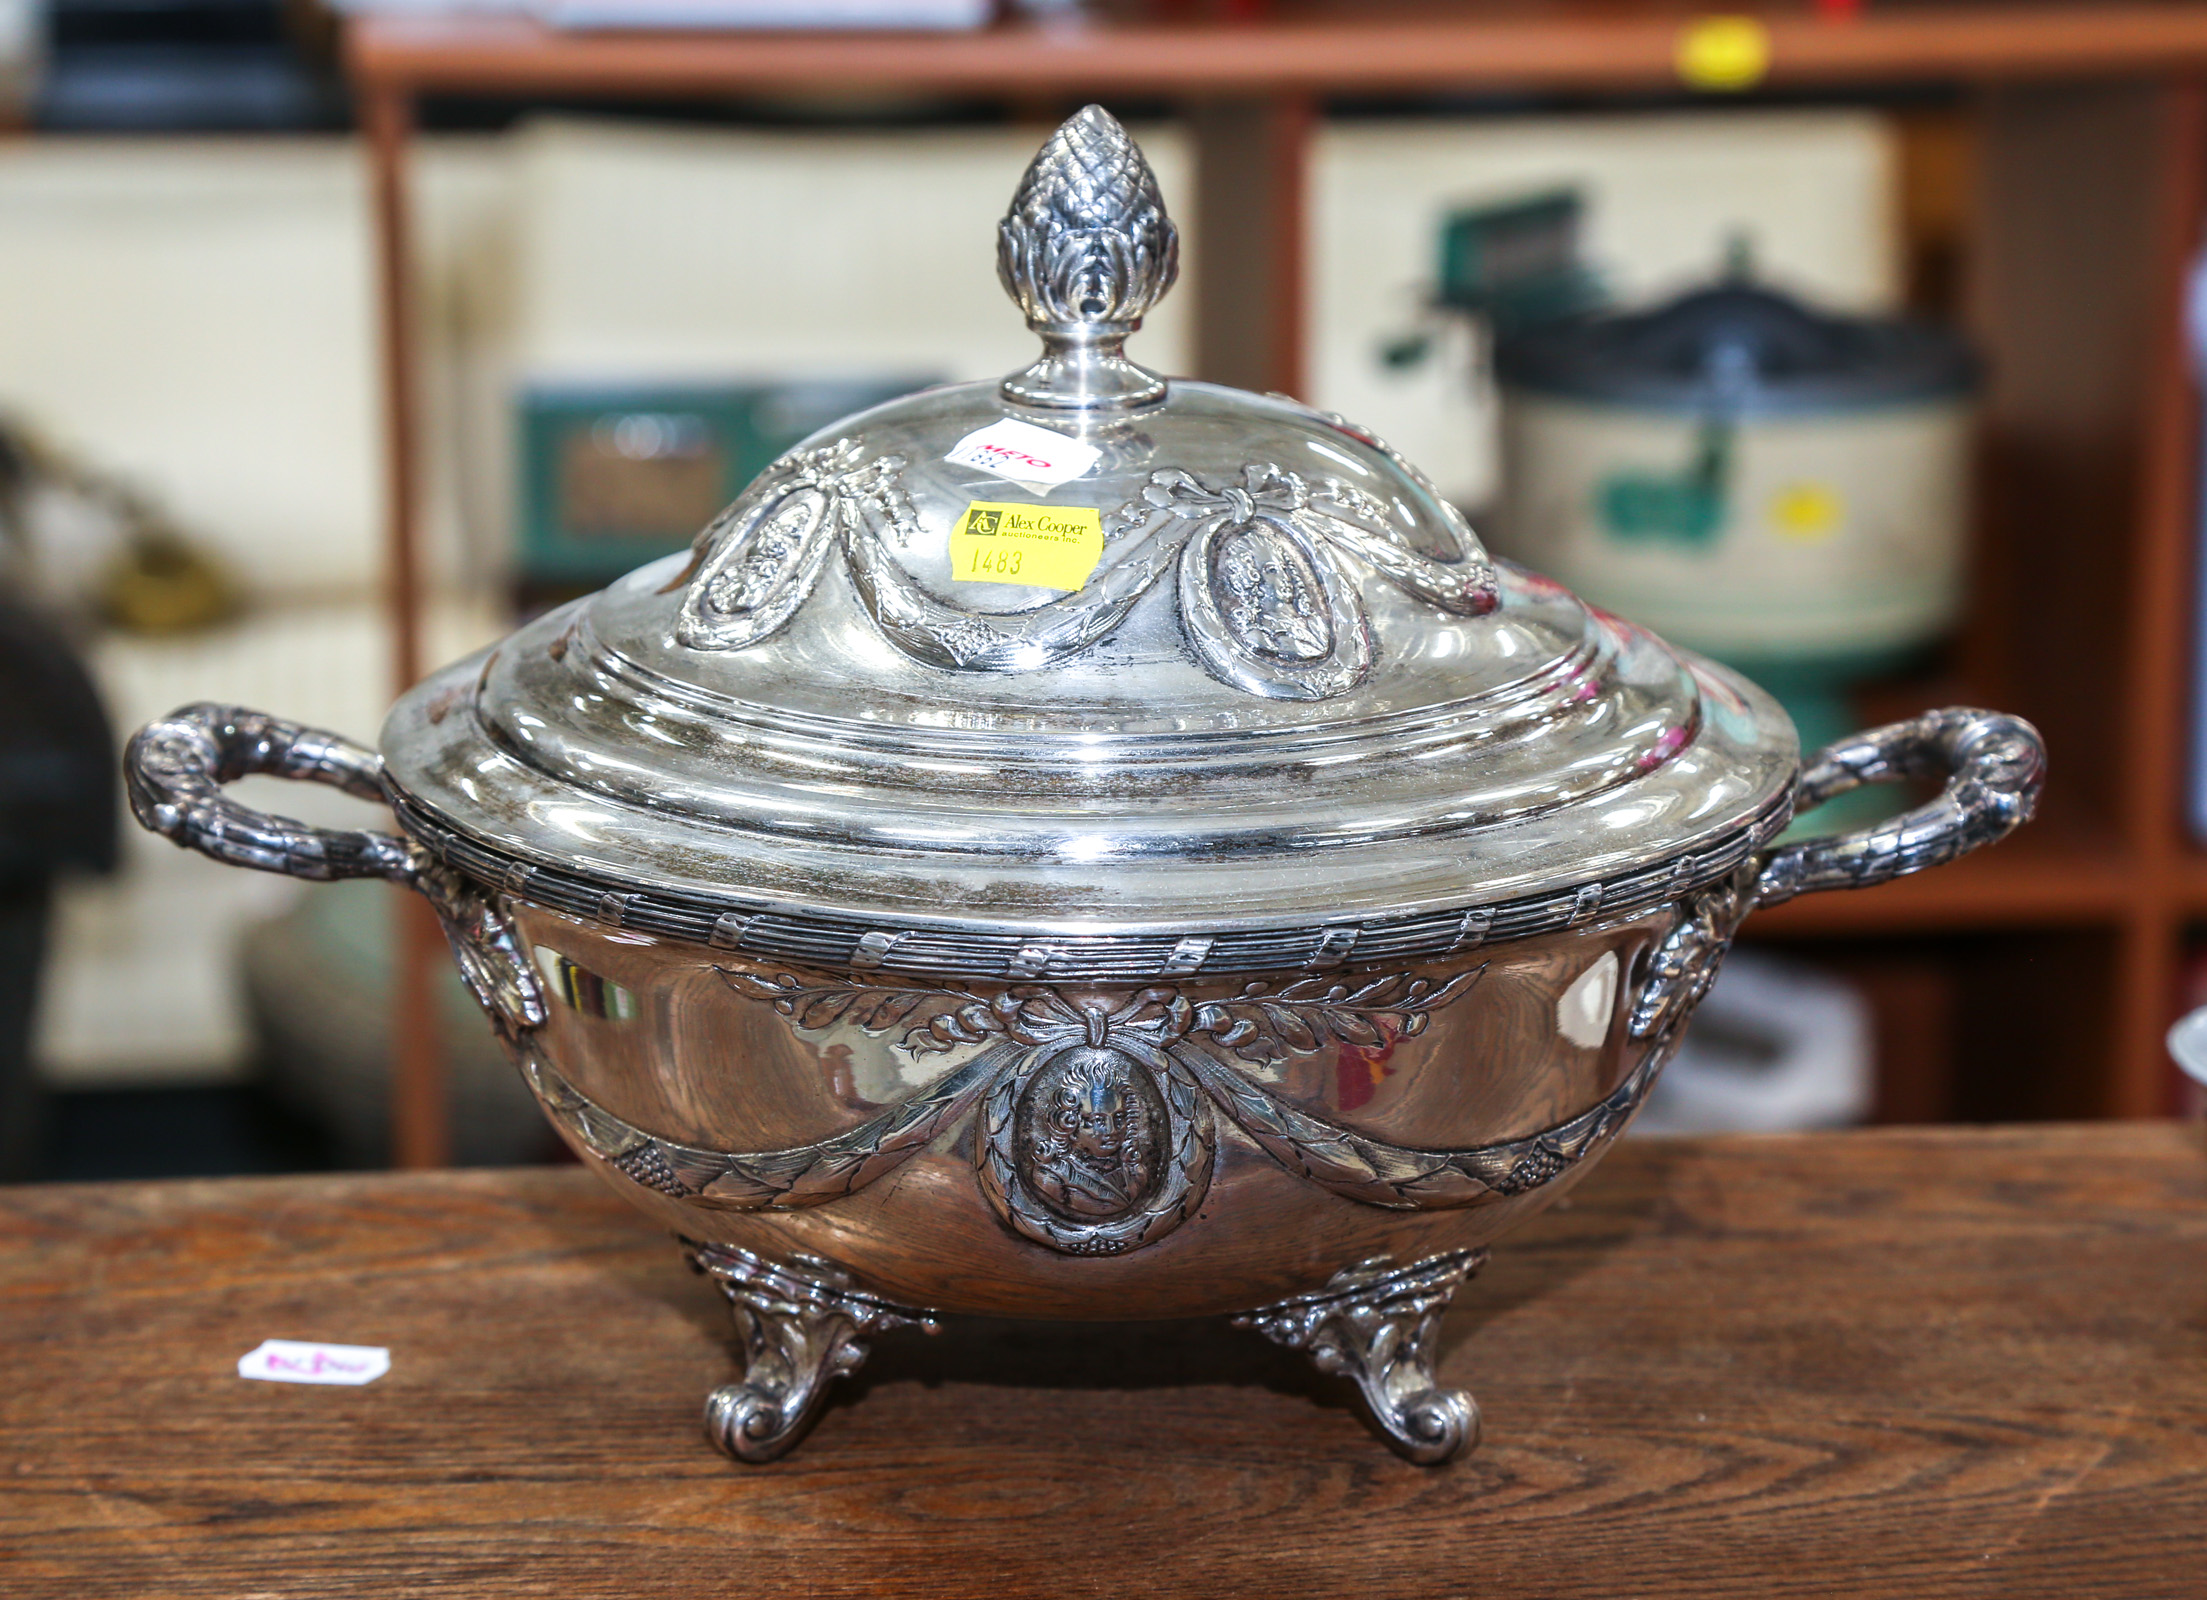 LEFEBVRE SILVER PLATED SERVING DISH